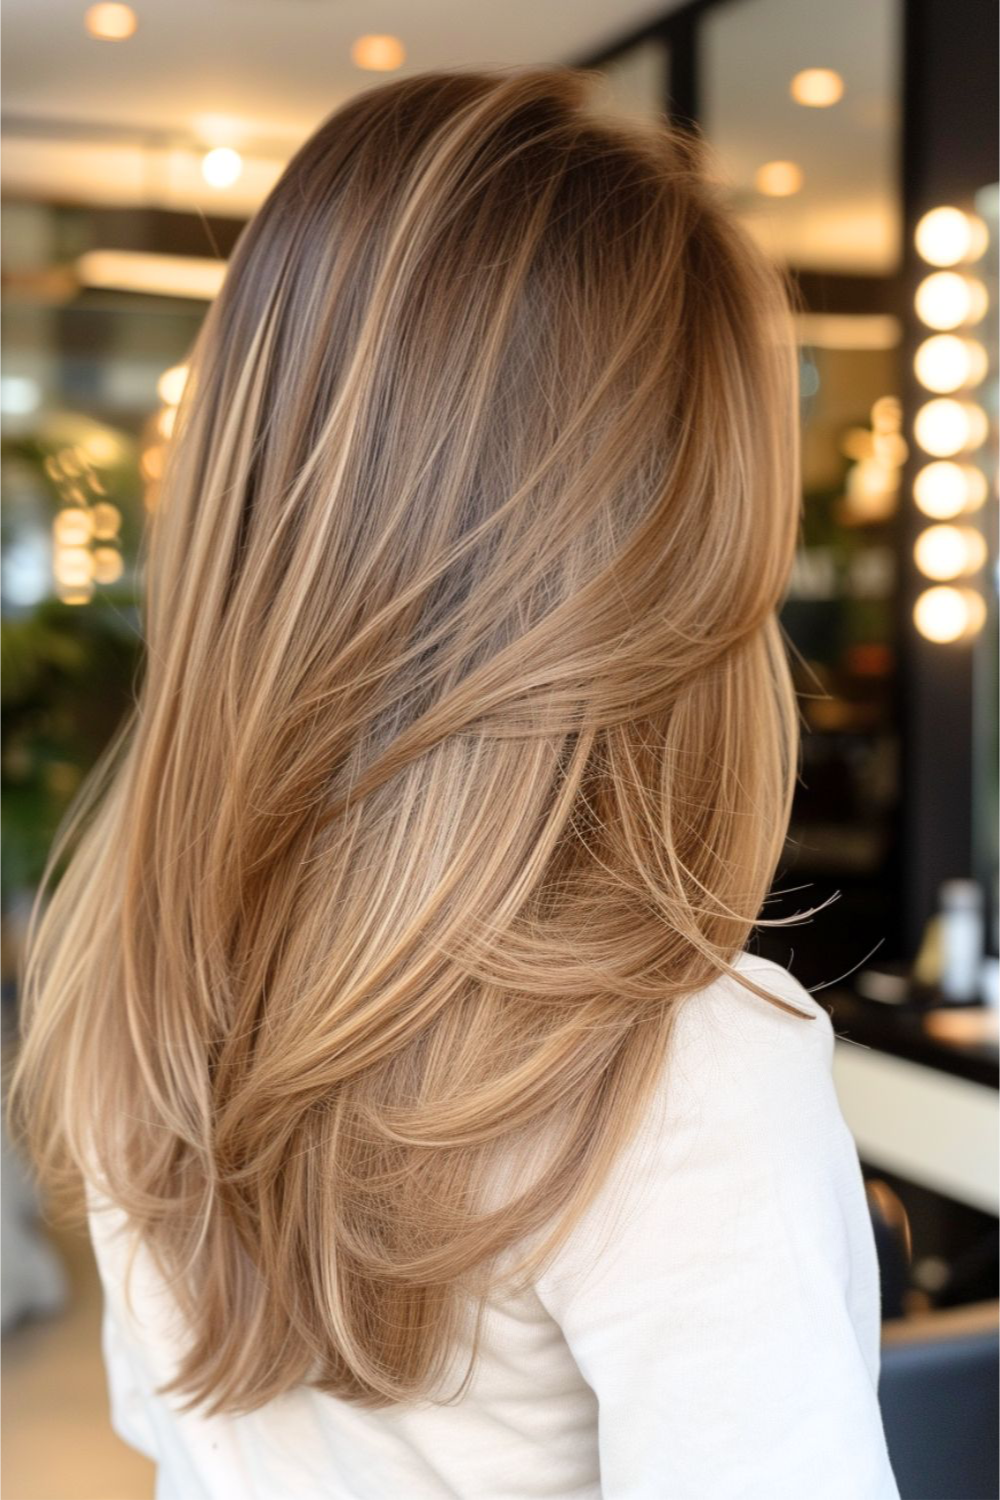 Stunning Haircut Ideas for Long Hair to Elevate Your Look